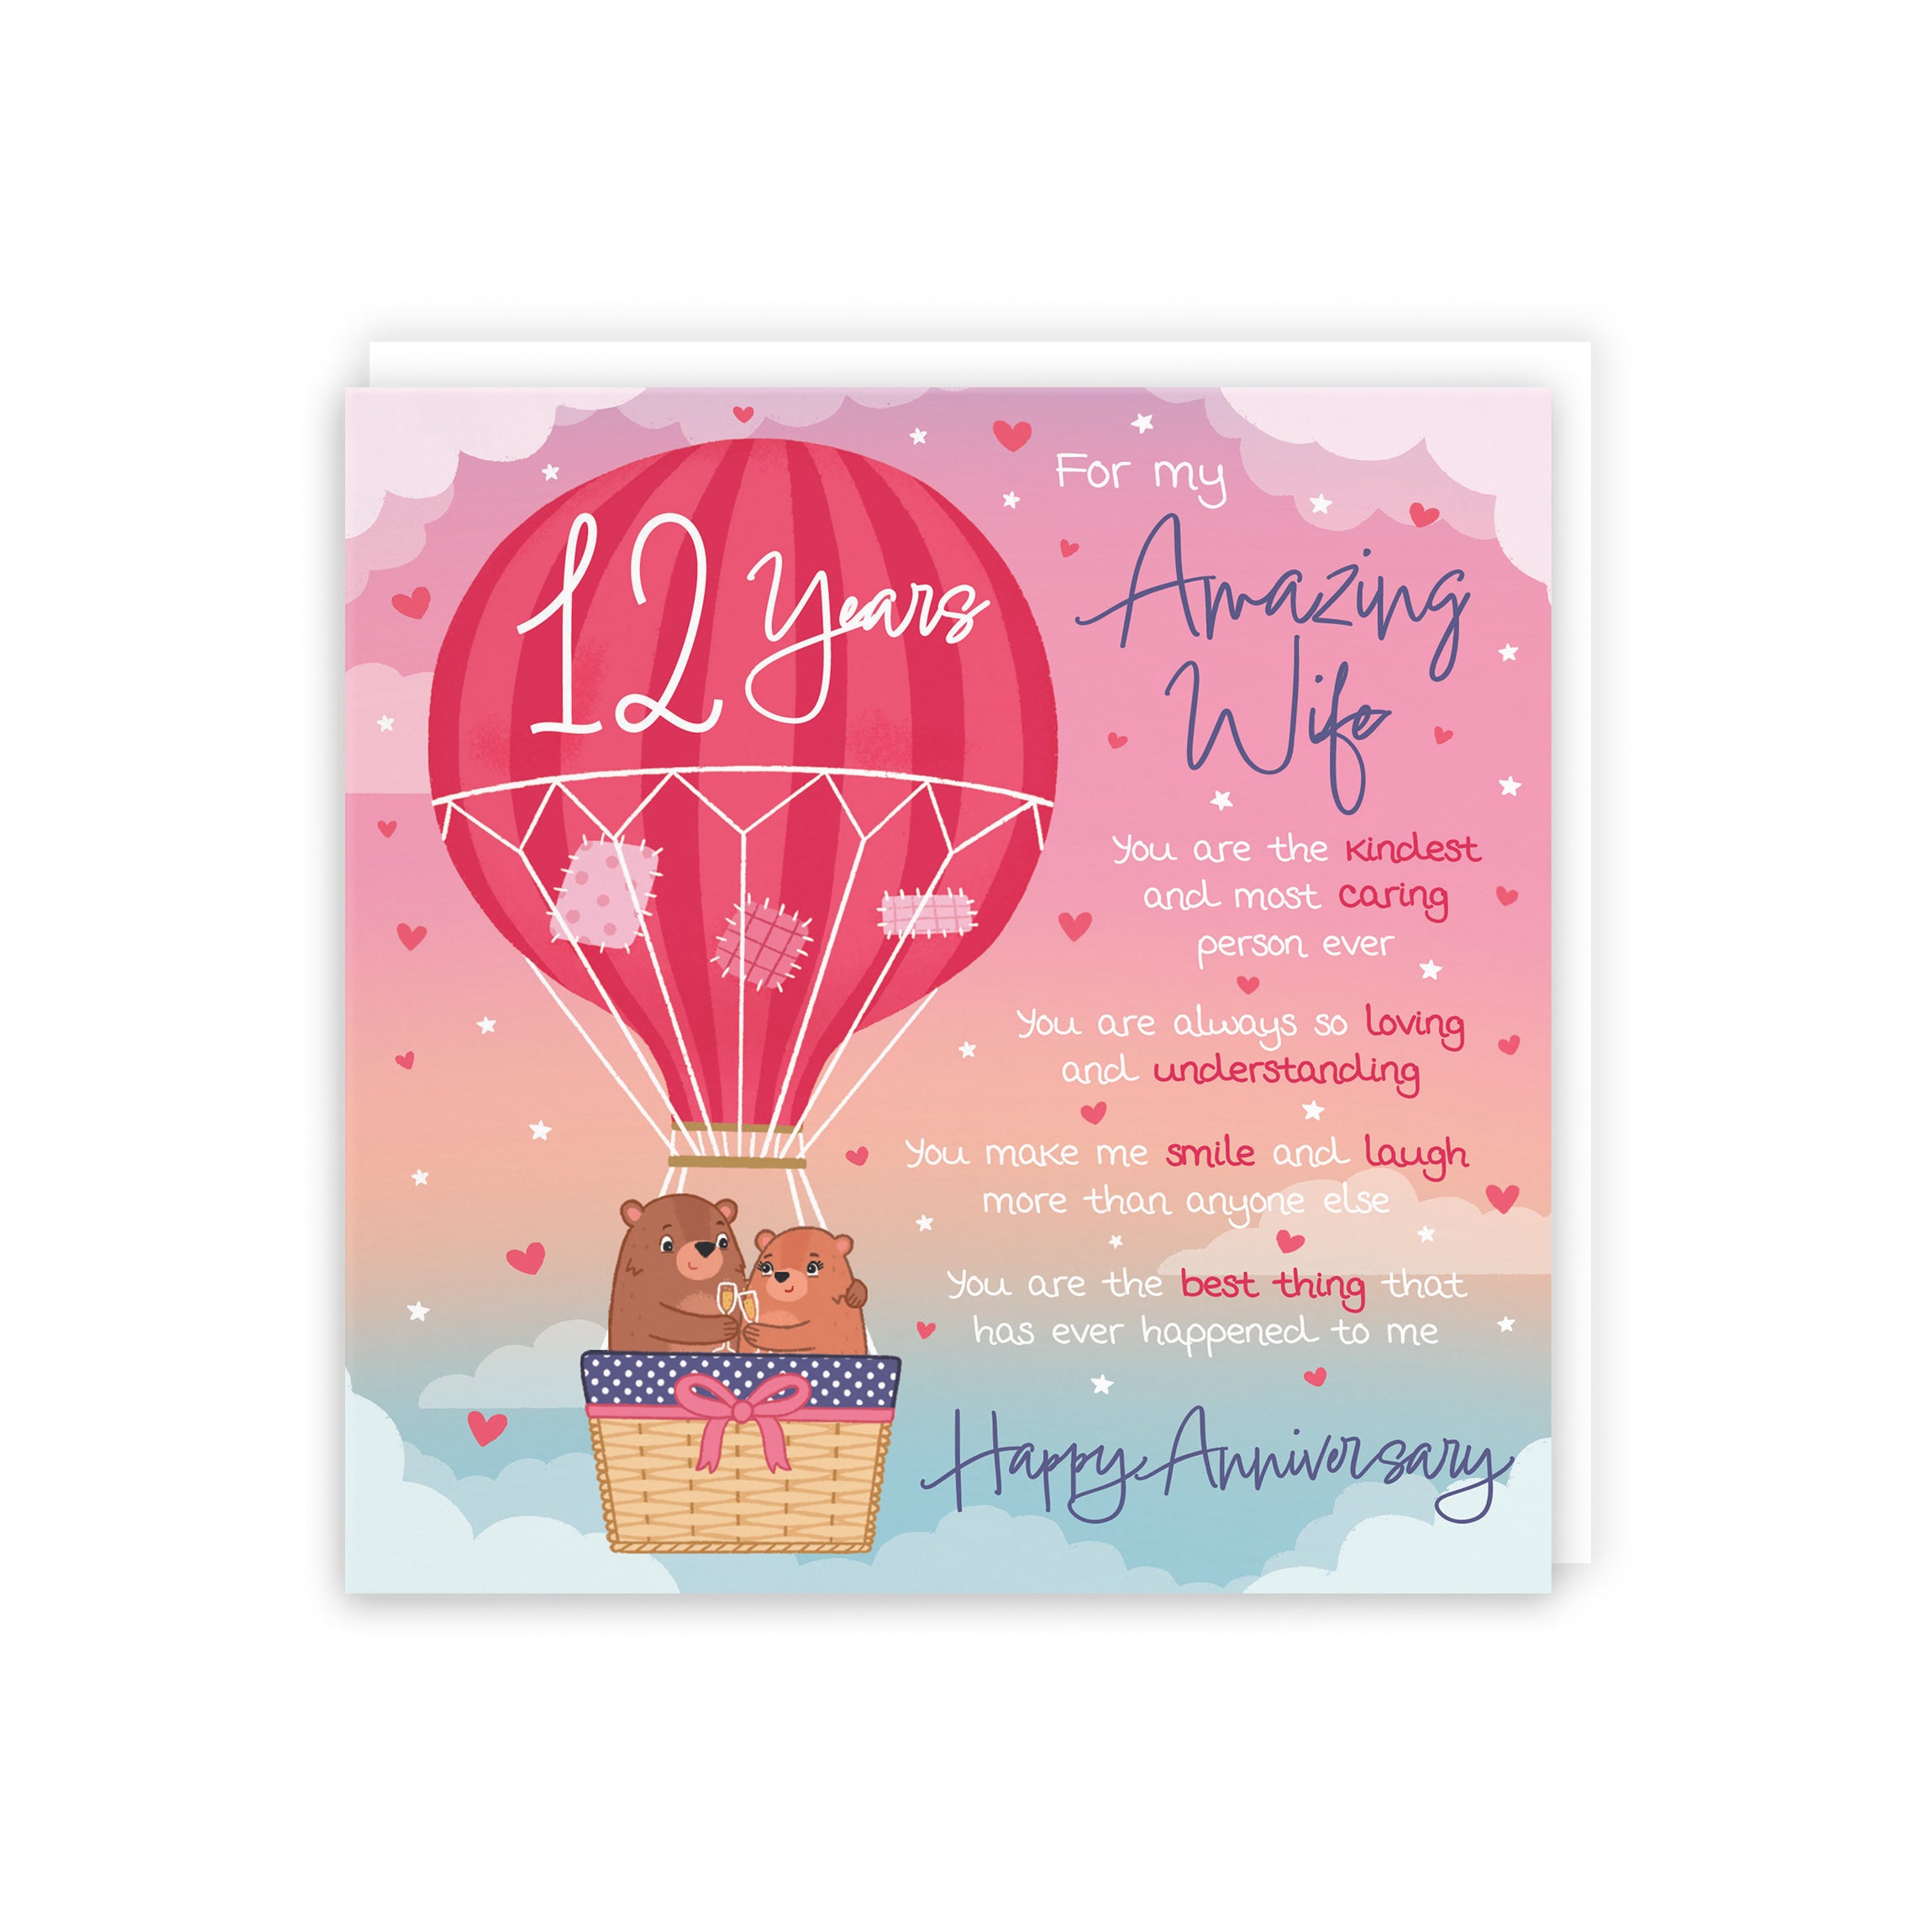 Wife 12th Anniversary Poem Card Love Is In The Air Cute Bears